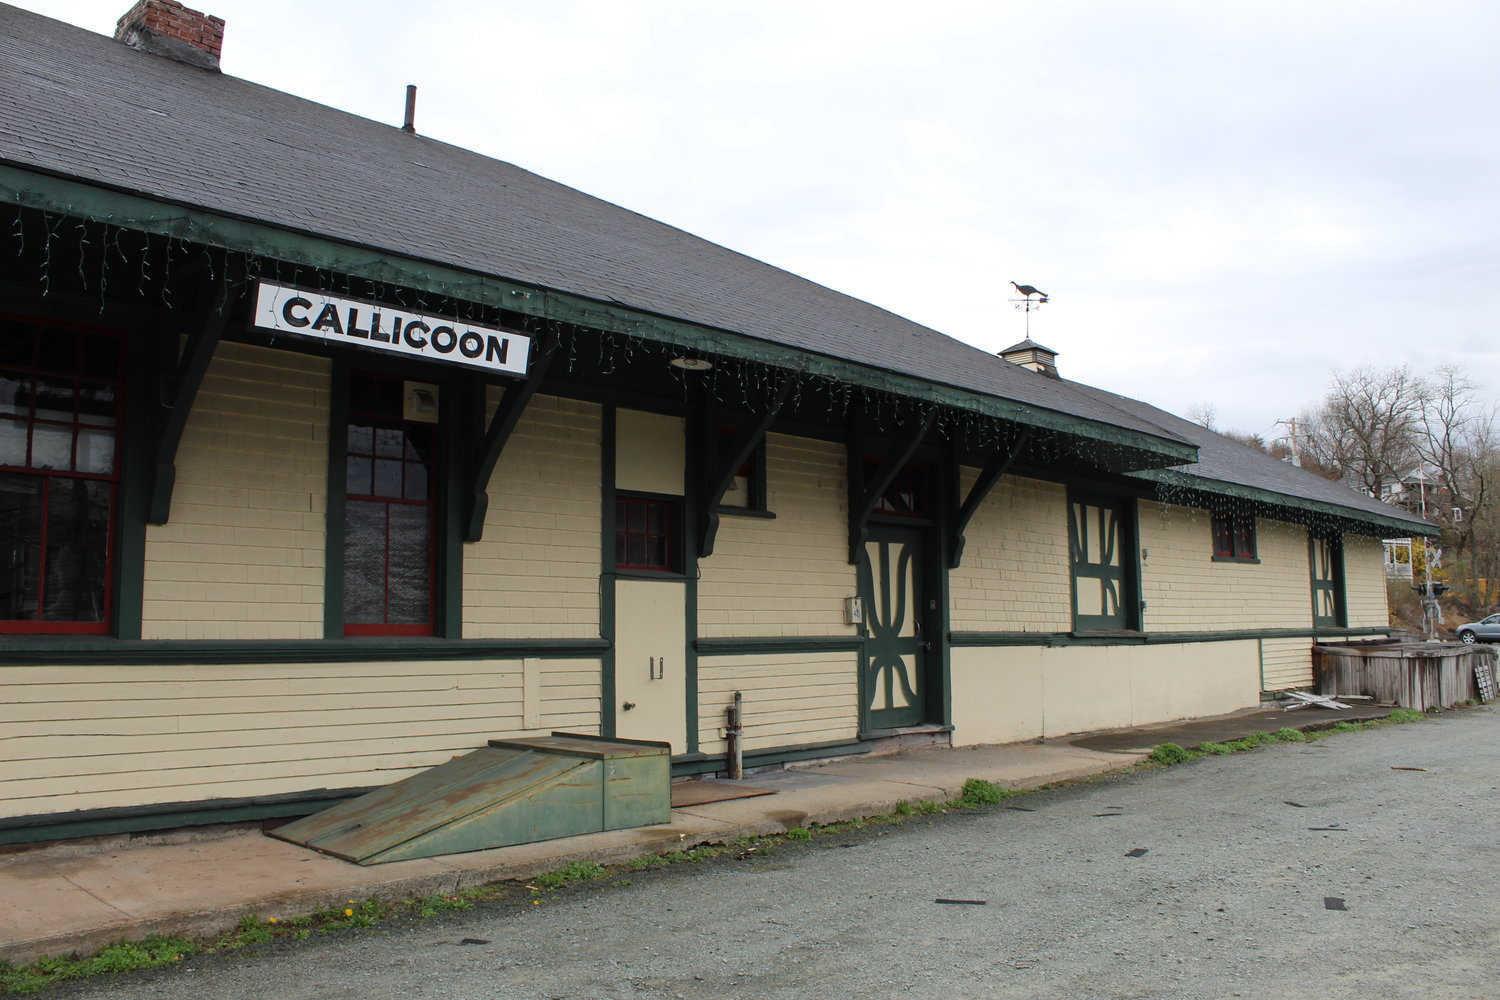 The Callicoon train station hasn’t changed much on the outside. But inside, transformation is ongoing...